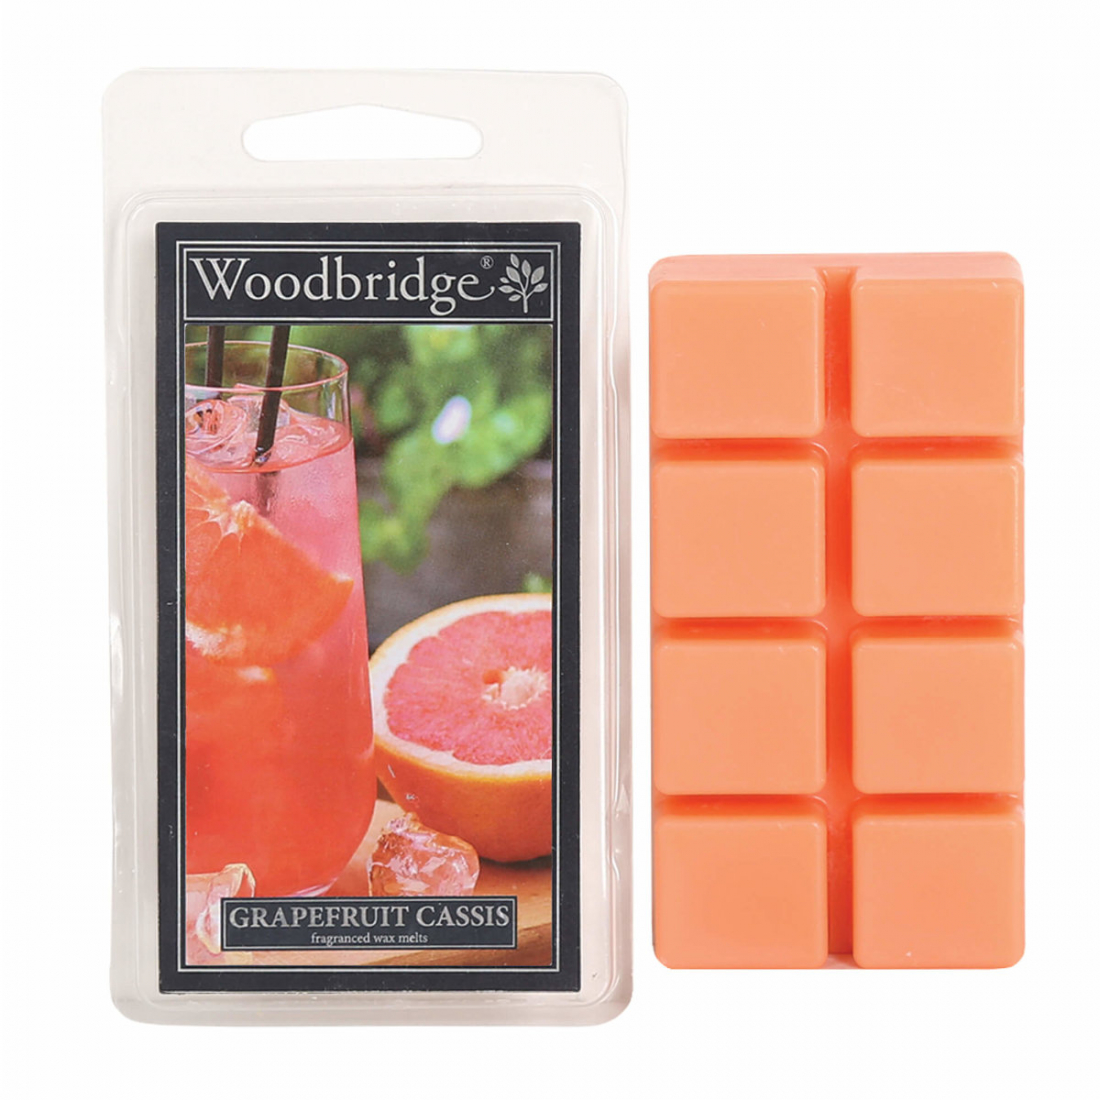 'Grapefruit Cassis' Scented Wax - 68 g